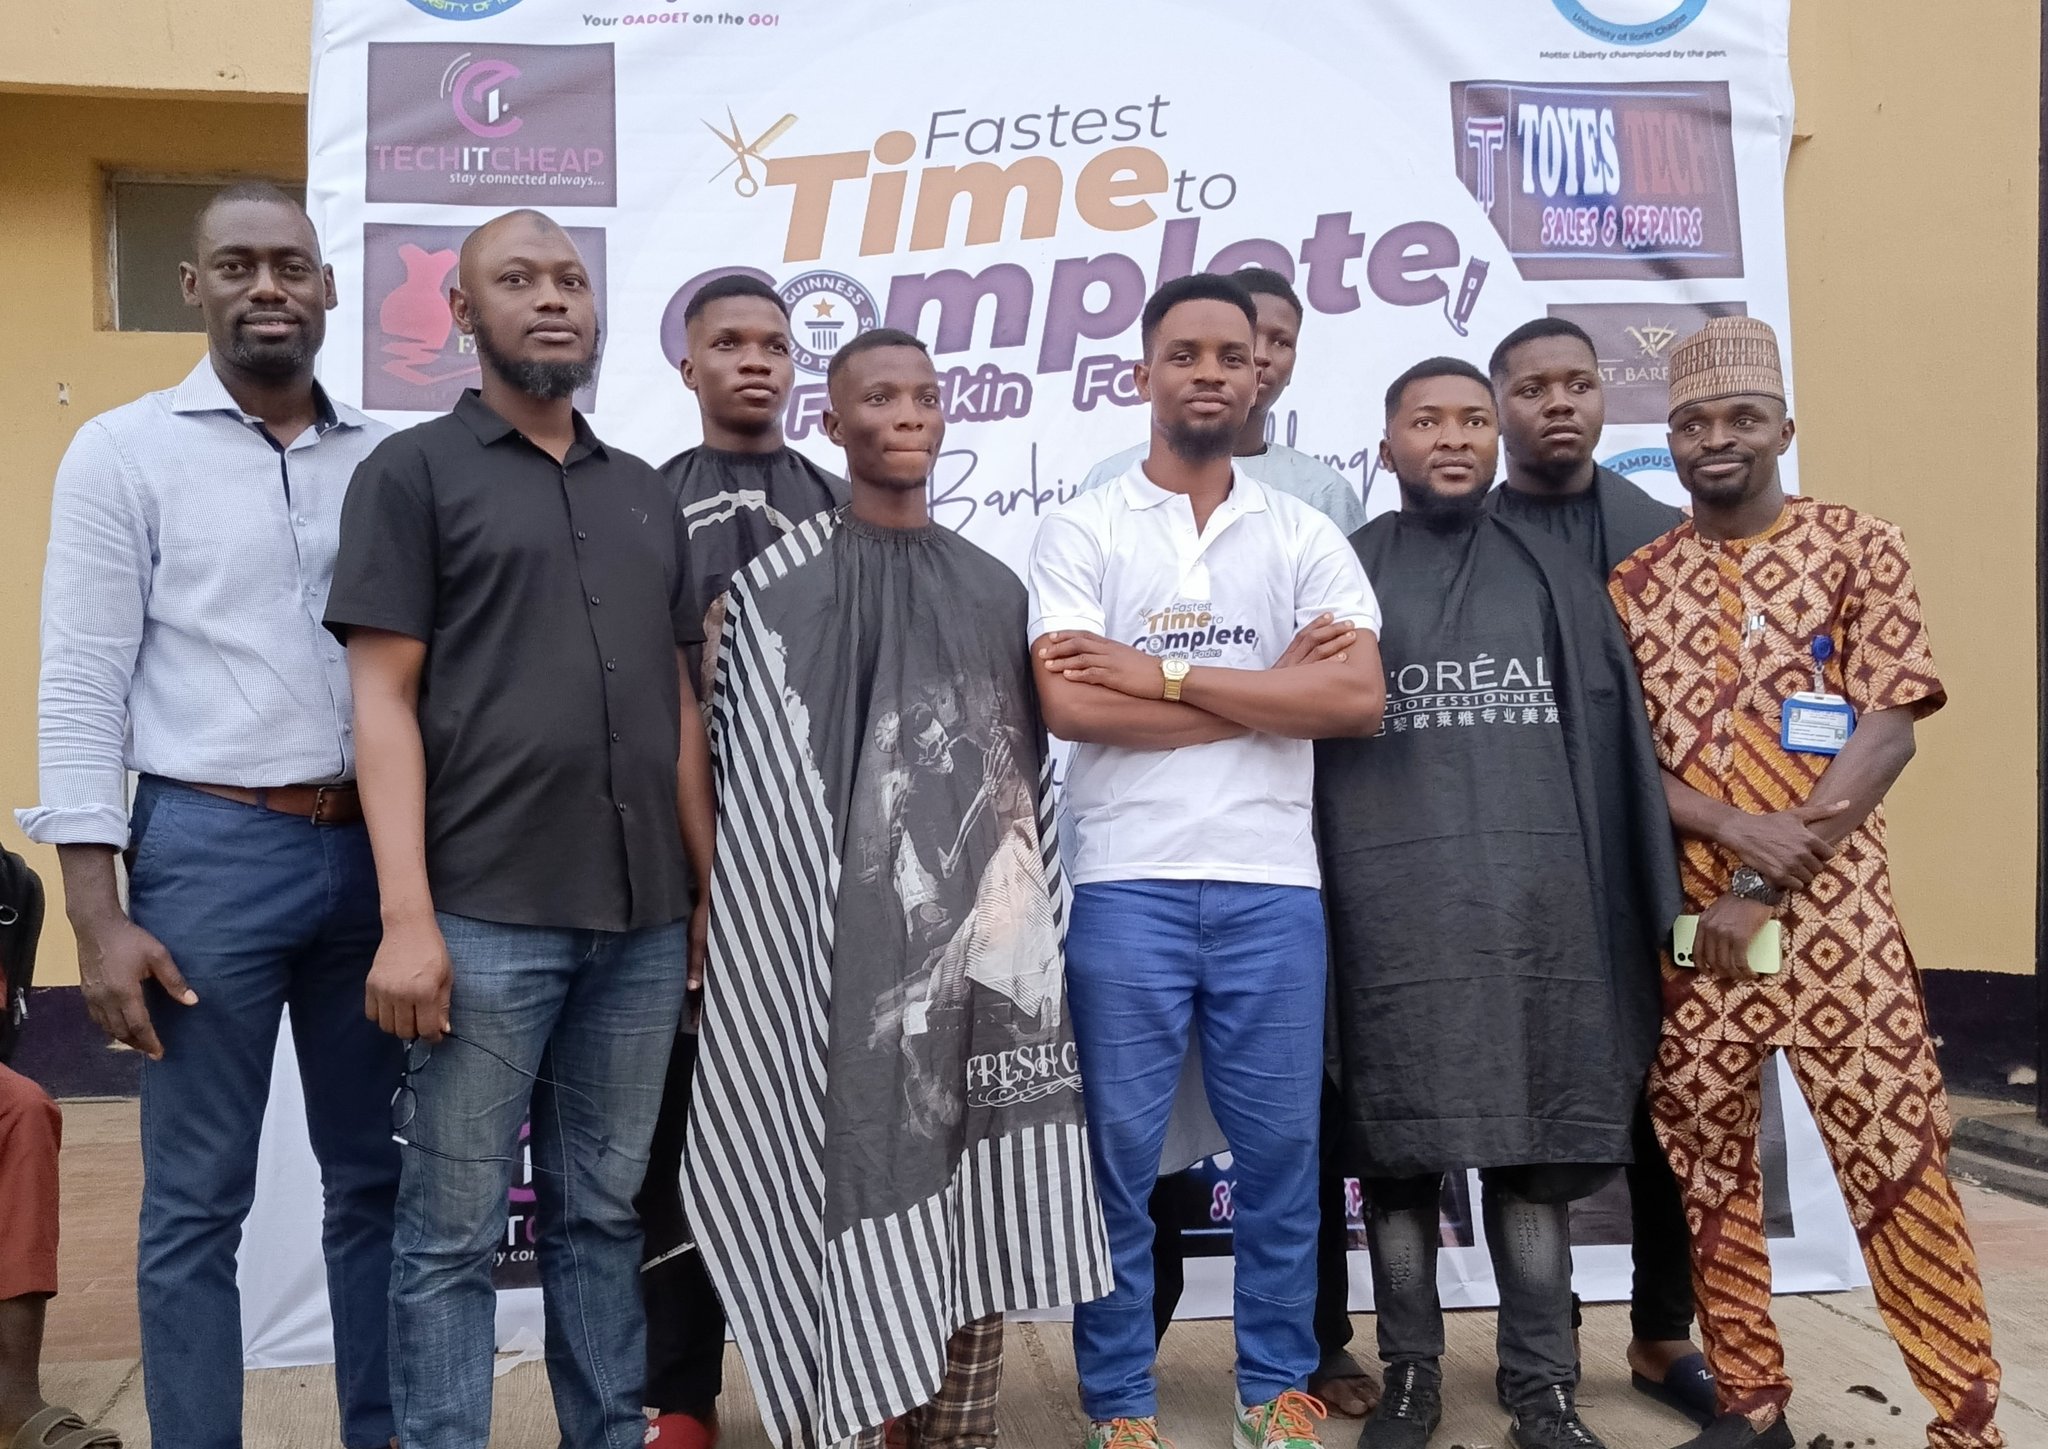 UNILORIN 400-level student sets new Guinness World Record in haircutting